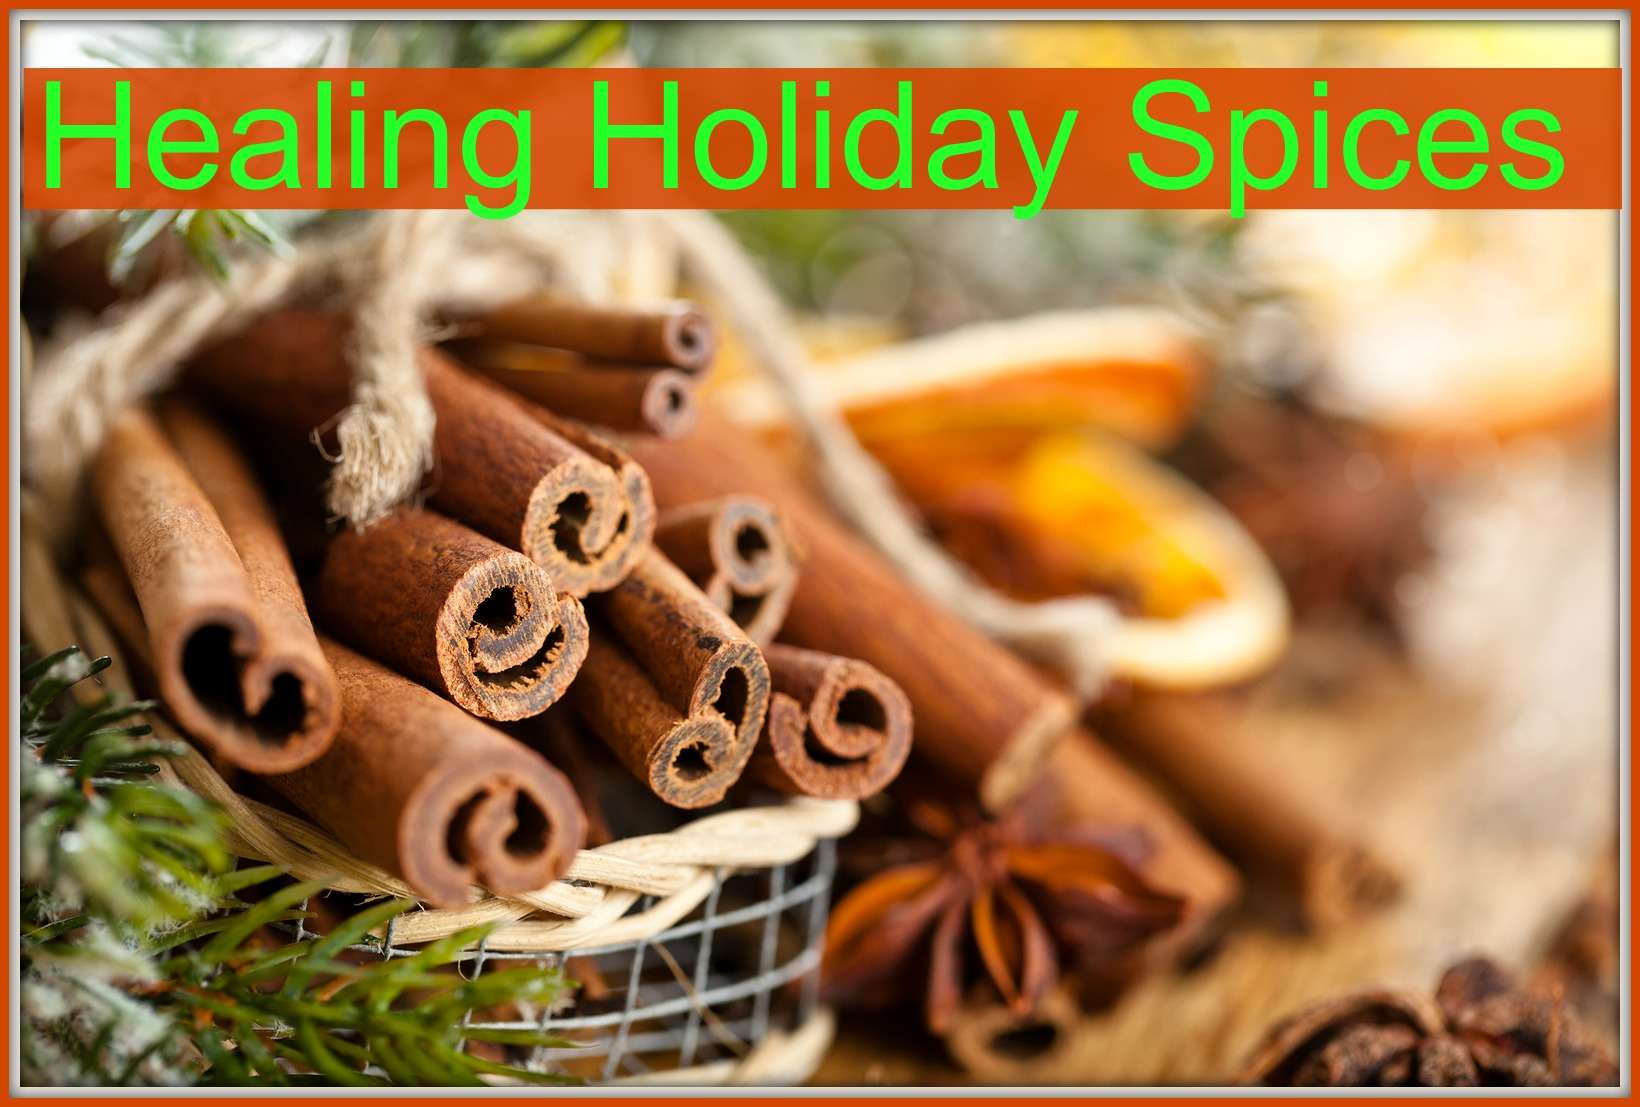 Top 3 Healing Holiday Spices